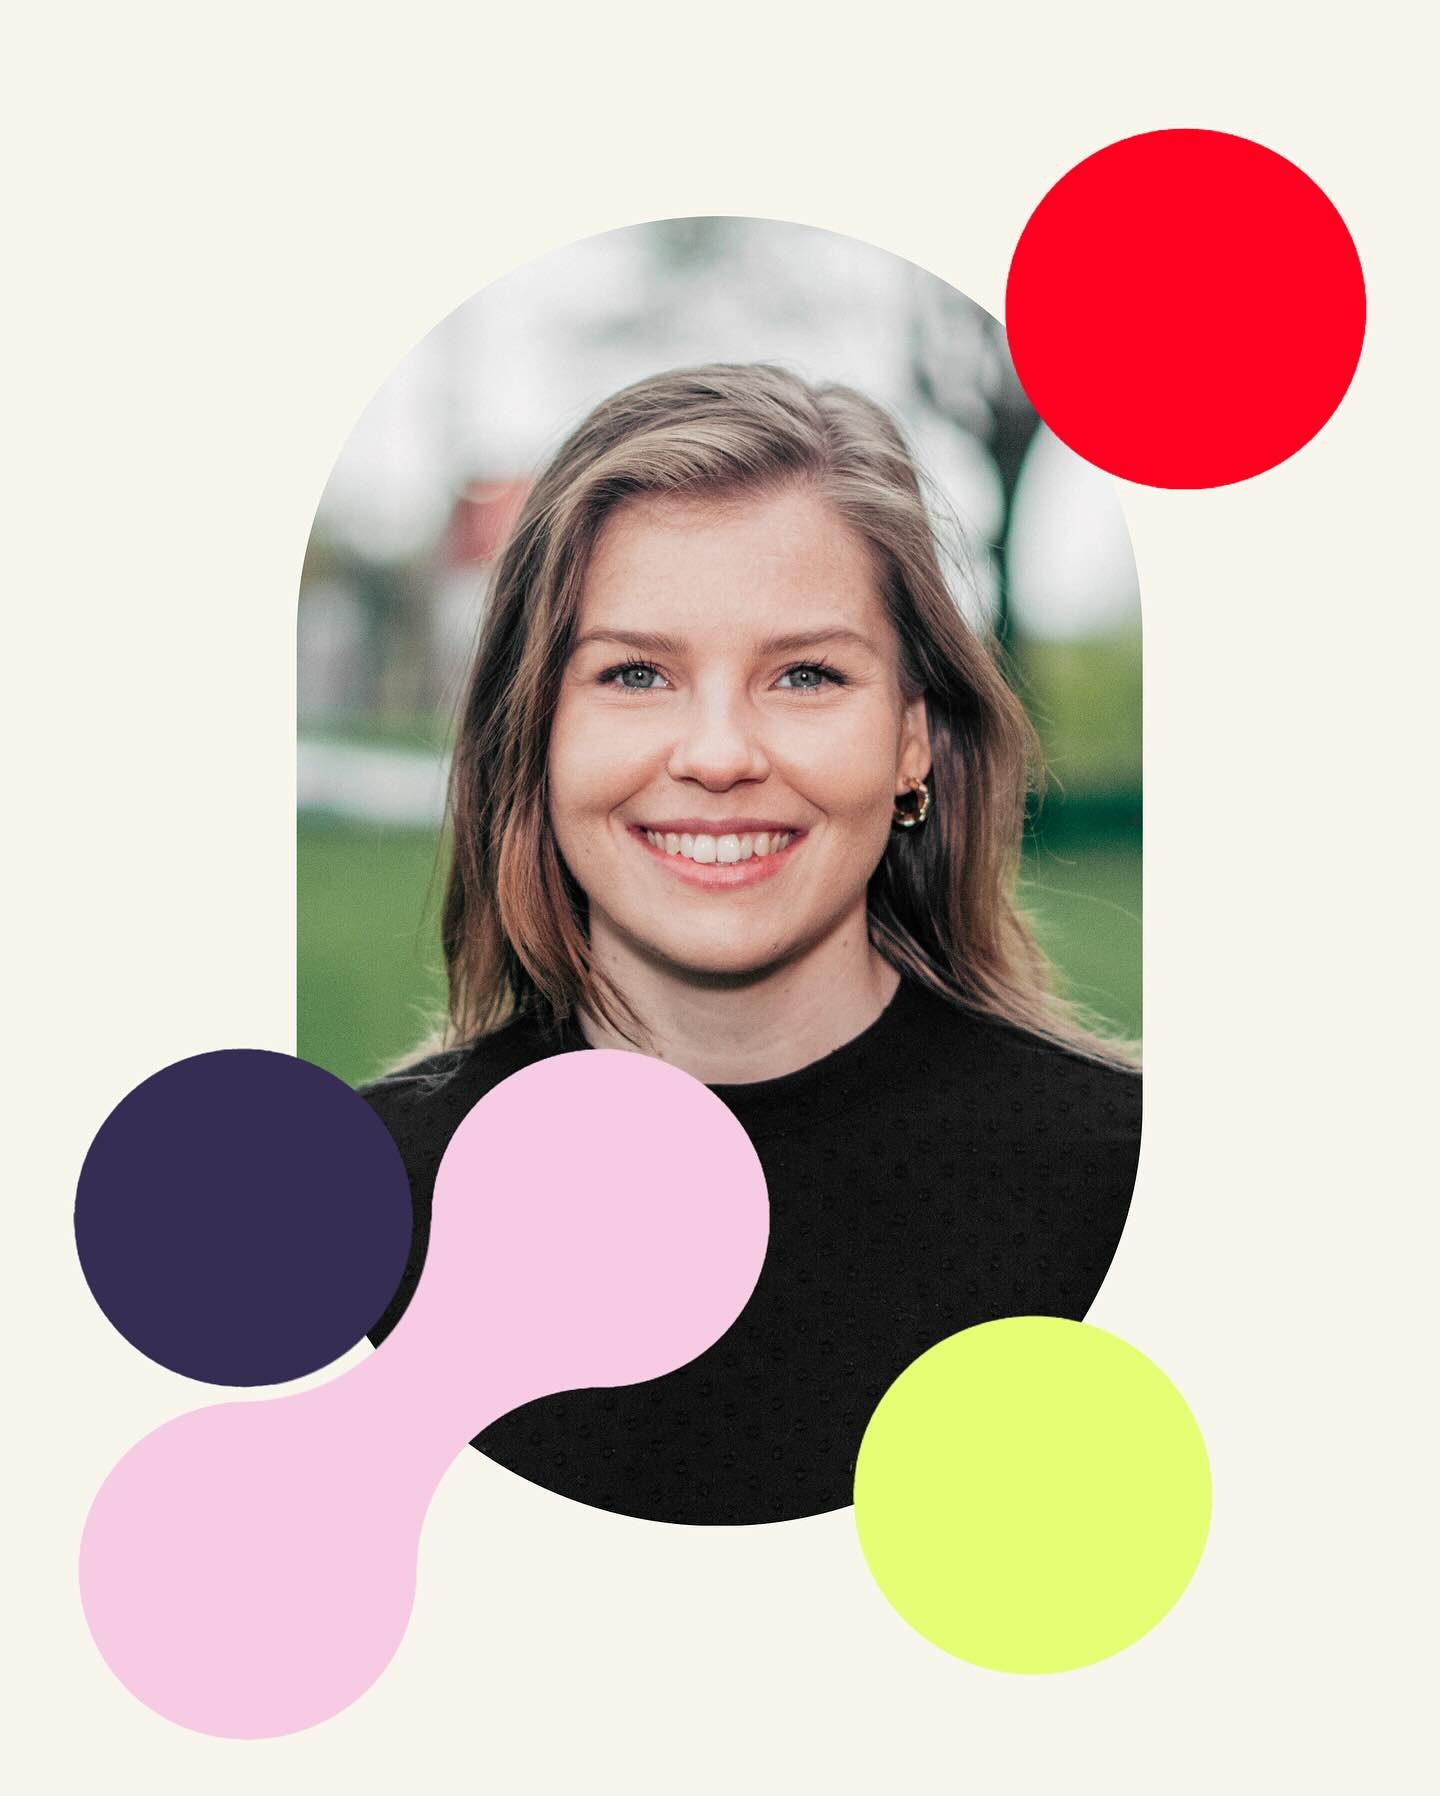 Until AI can totally take over marketing, we are going to keep hiring talented people to work in their native language. People like Ulrikke Nesheim who is a teacher at Gard Skole, and has a background in journalism ✍️. She has also had a vibrant care